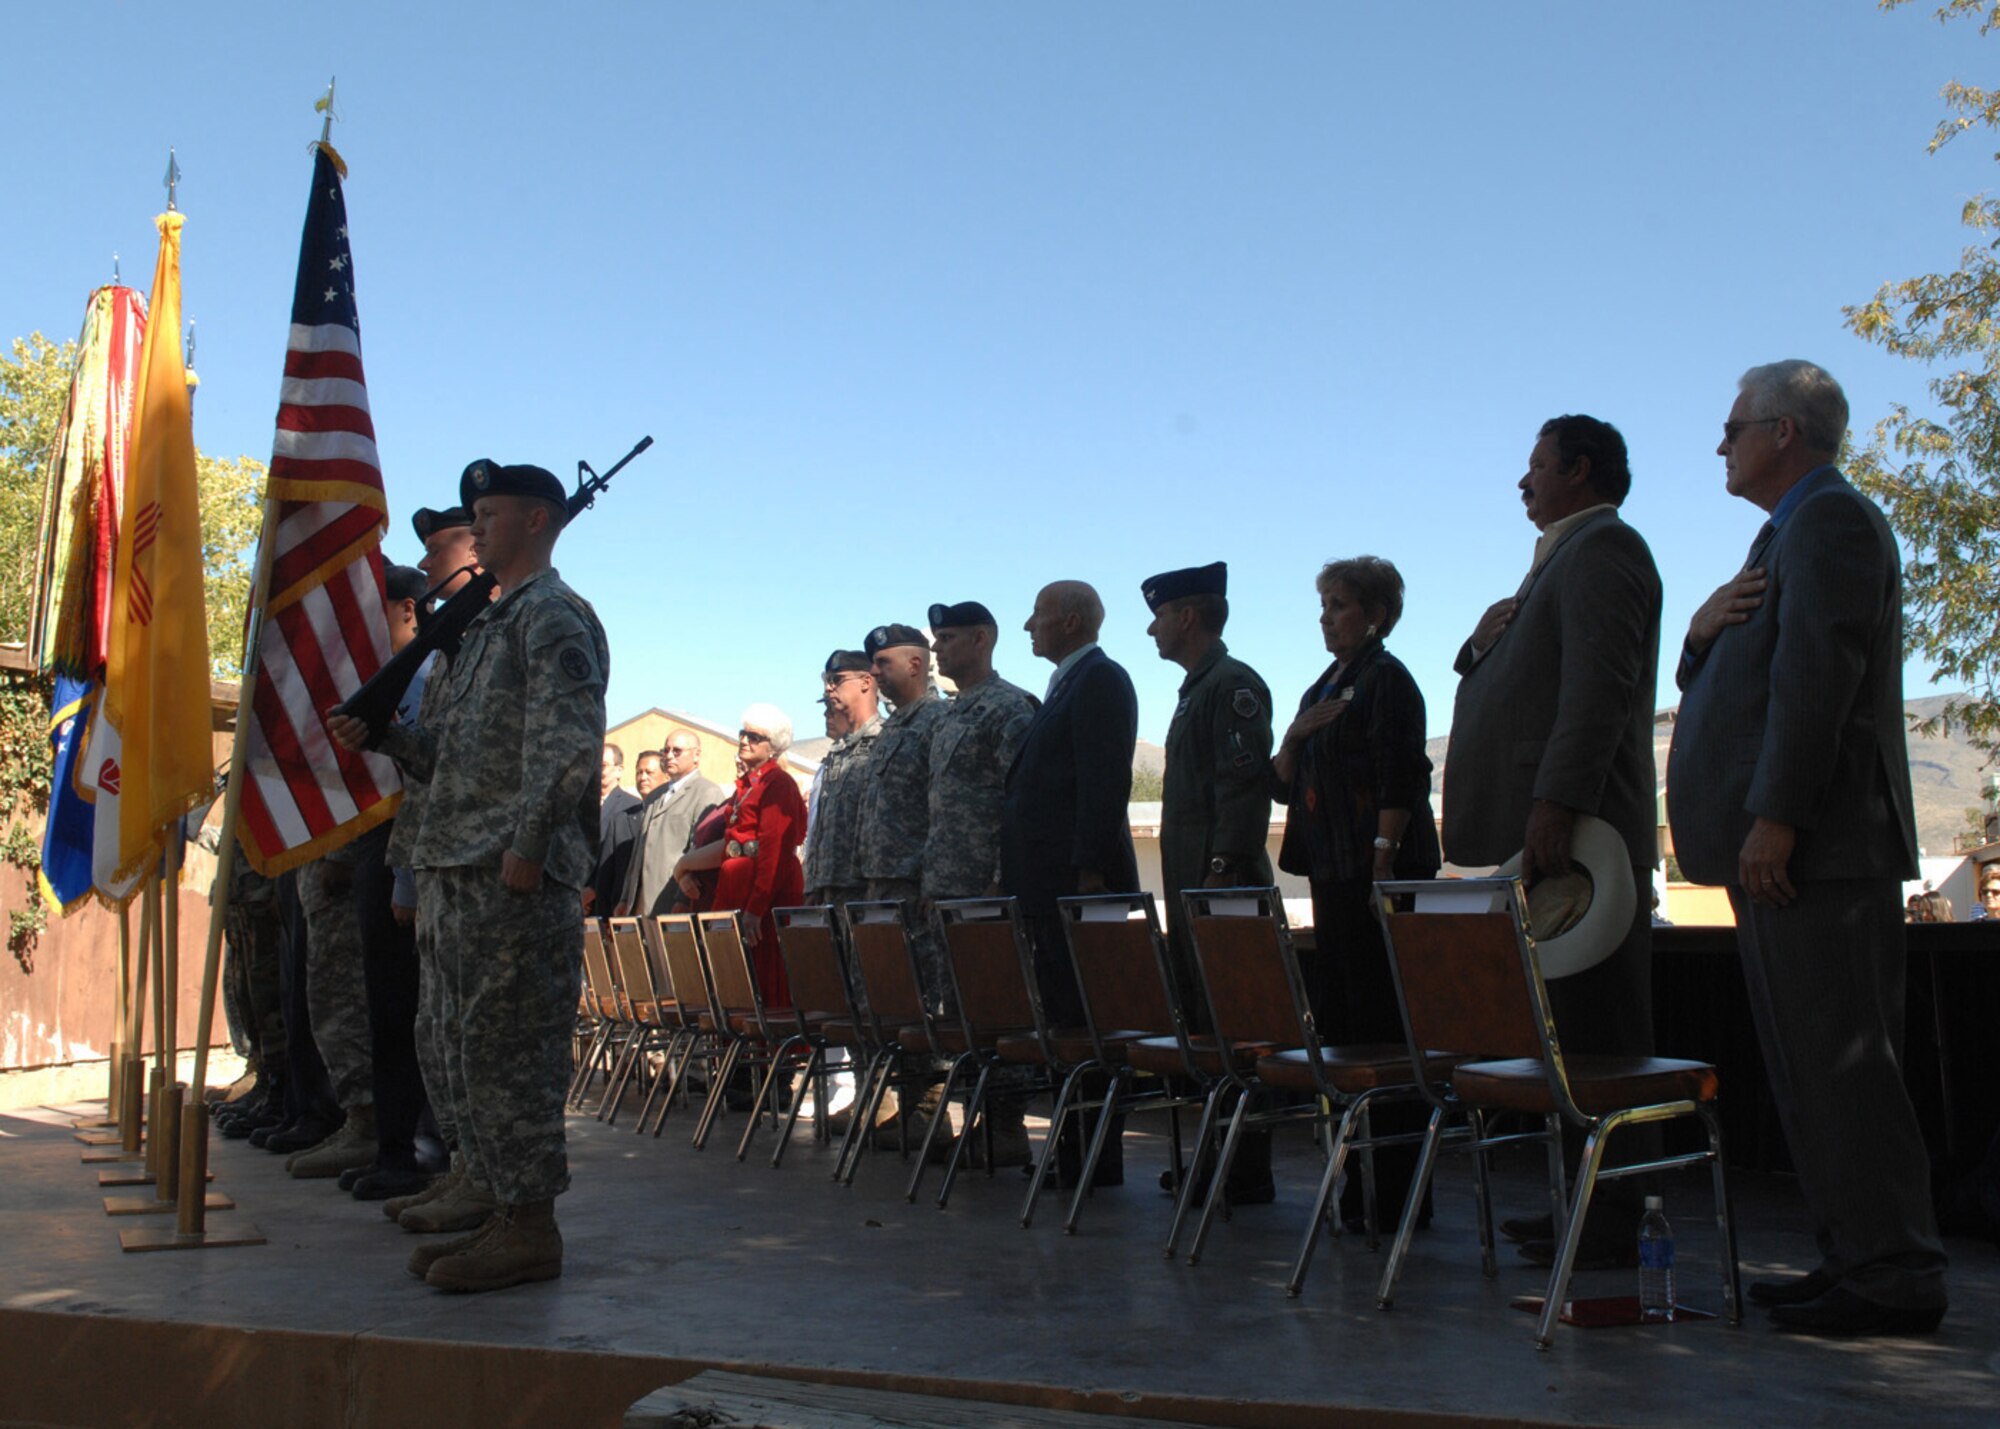 Representatives of Alamogordo, N.M., Las Cruces, N.M., Holloman Air Force Base, White Sands Missile Range, Ft. Bliss and the New Mexico National Guard stand at attention during the presentation of the nation's colors in Alamogordo, October 18. The ceremony was held at the Alameda Zoo after the signing of the Army Community Covenant that supported the Soldiers and their families. (U.S. Air Force photo/Airman 1st. Class Veronica Salgado)